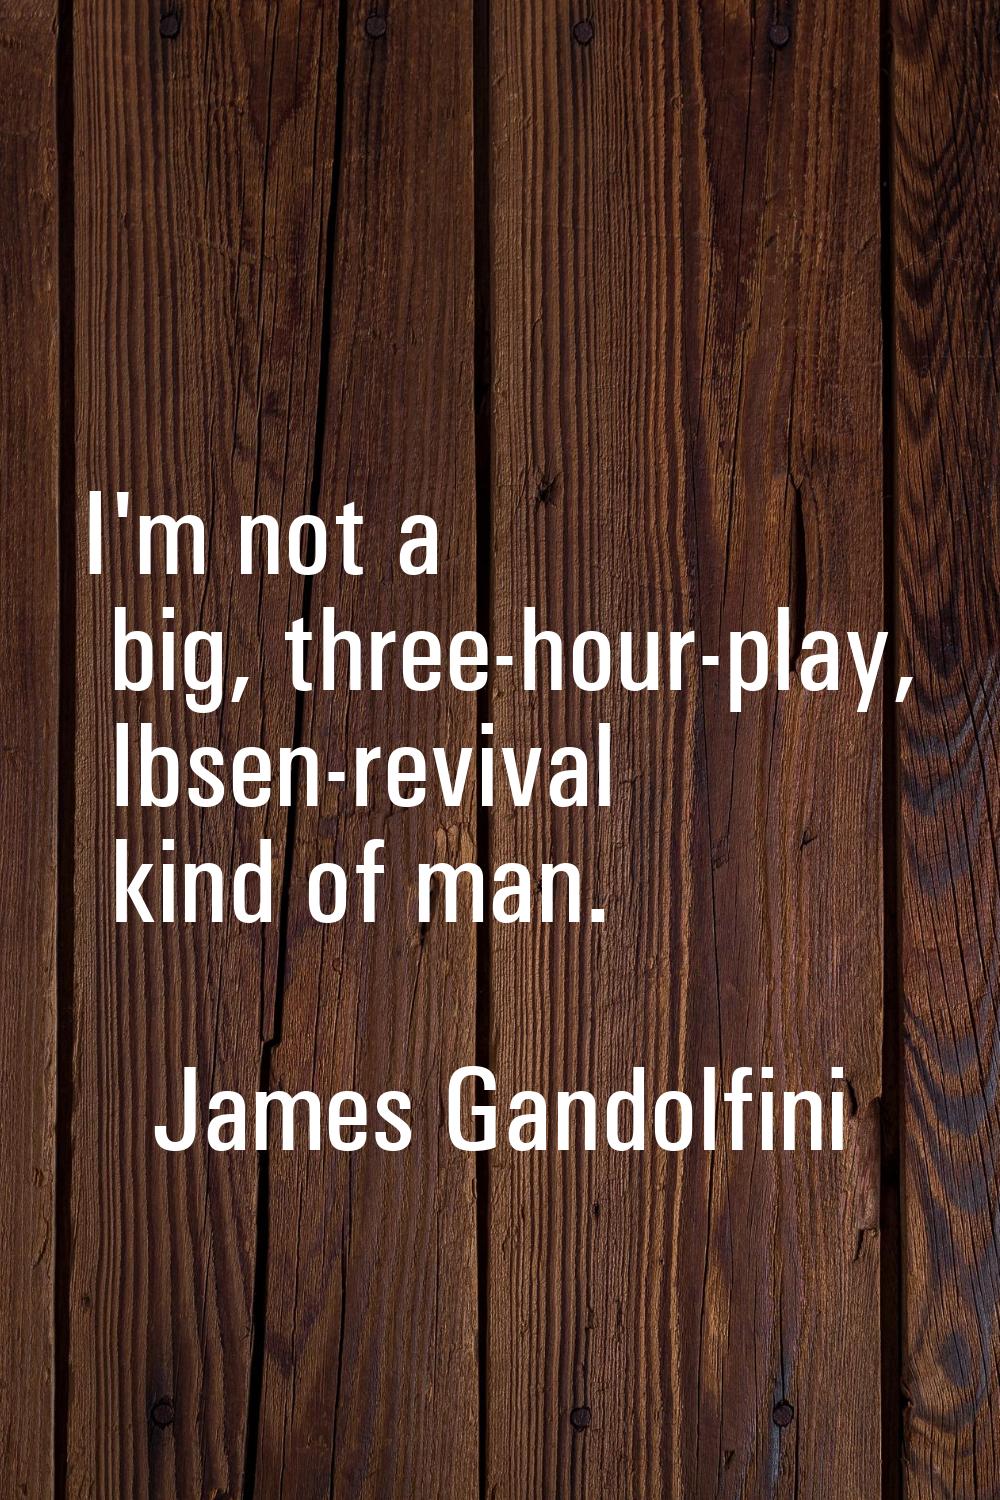 I'm not a big, three-hour-play, Ibsen-revival kind of man.